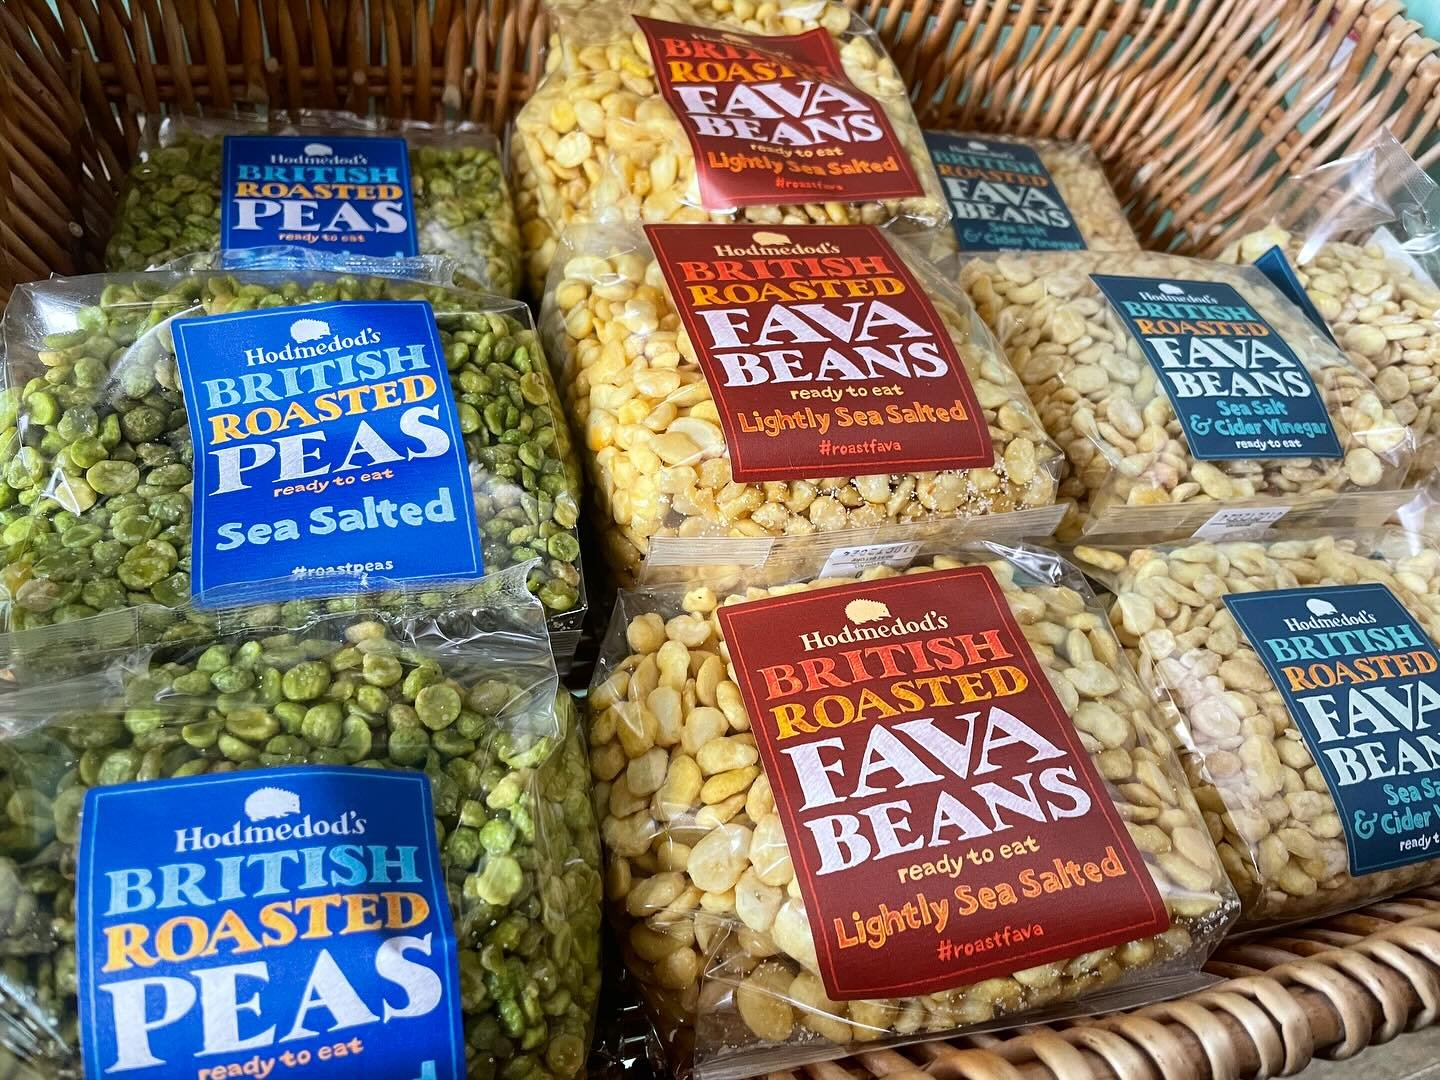 🫘 These delicious Roasted Fava Beans &amp; Green Beans are from @hodmedods - who are passionate about supporting British farmers that grow grains and pulses. 🫛 

We also have their Organic Wholemeal YQ wheat flour &amp; their Essex grown smoked qui